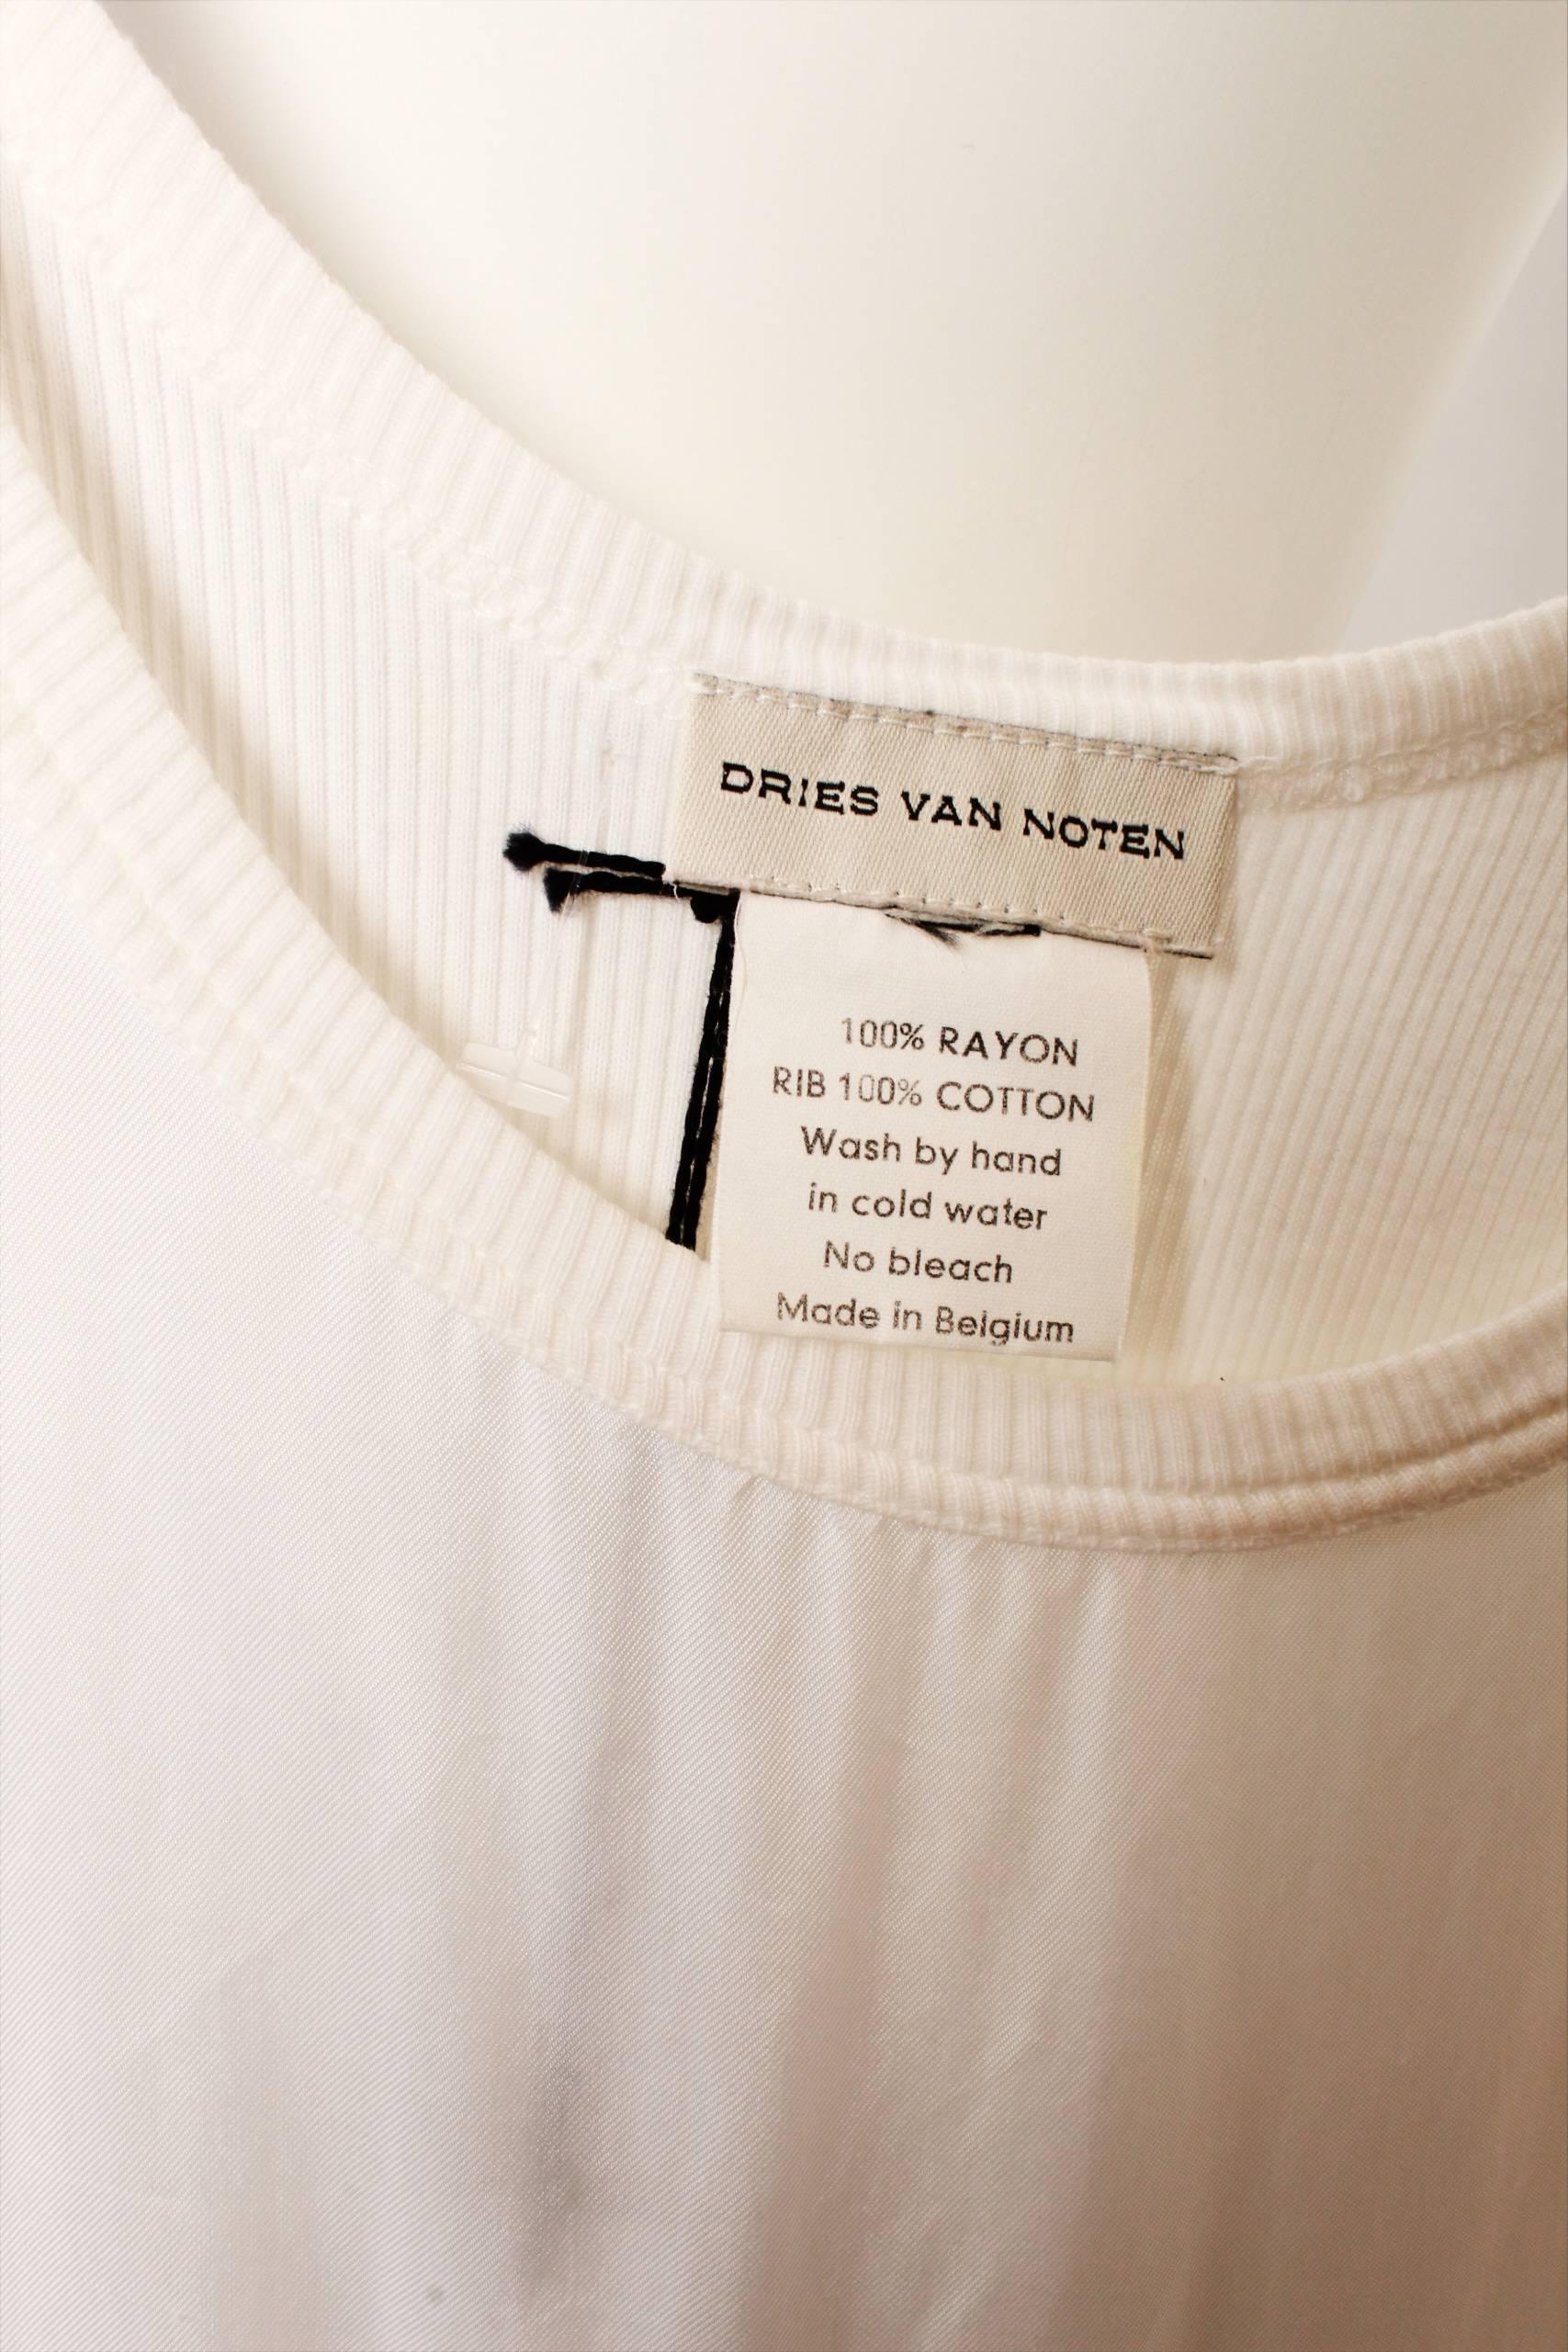 Dries Van Noten Full Length White Singlet Style Dress In Good Condition For Sale In Melbourne, Victoria